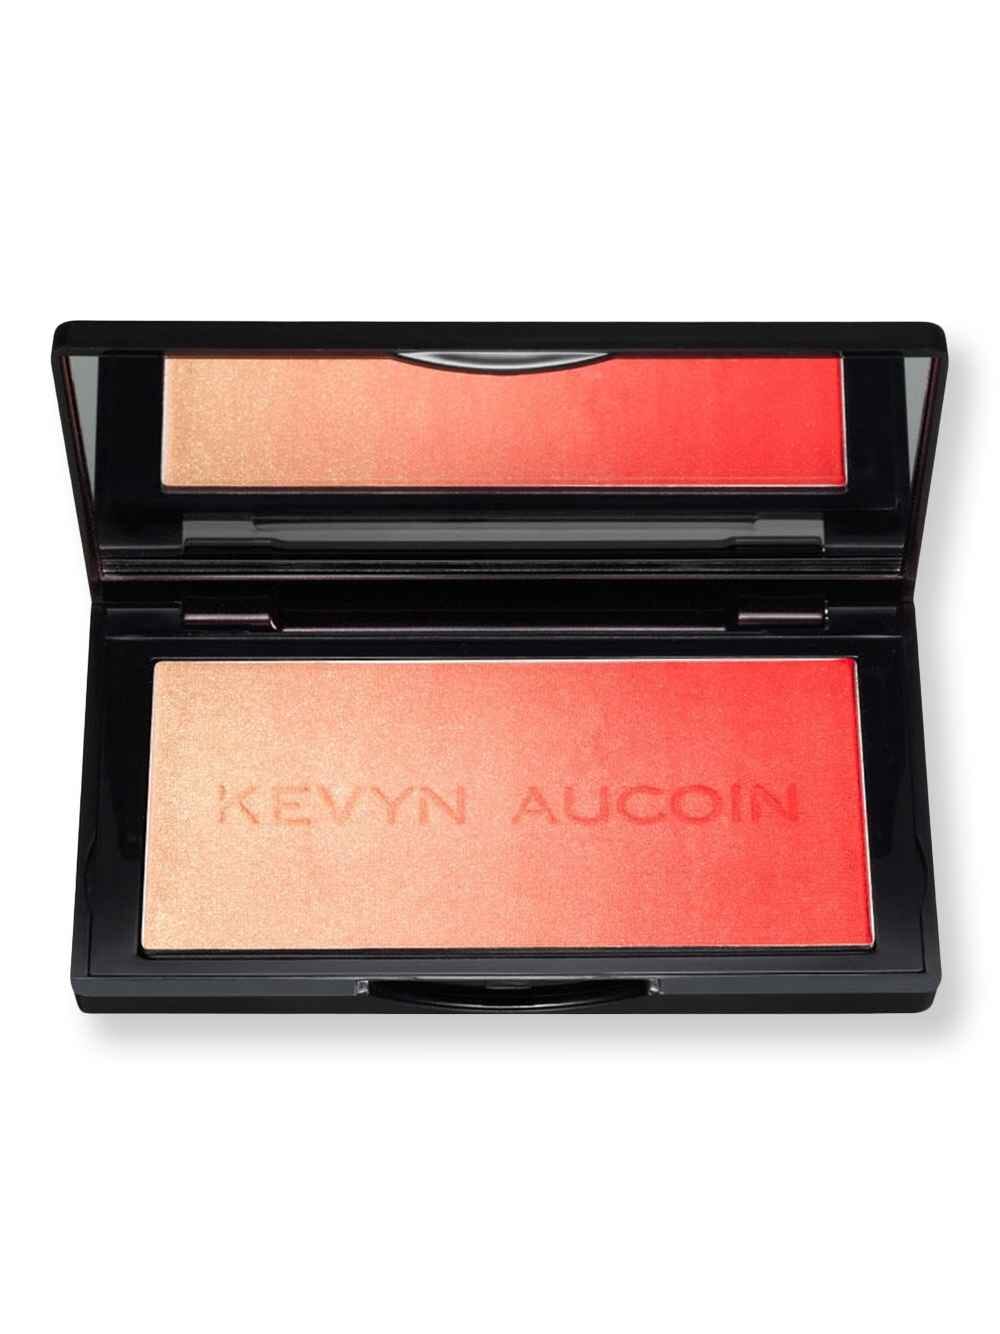 Kevyn Aucoin Kevyn Aucoin The Neo-Blush Sunset Blushes & Bronzers 